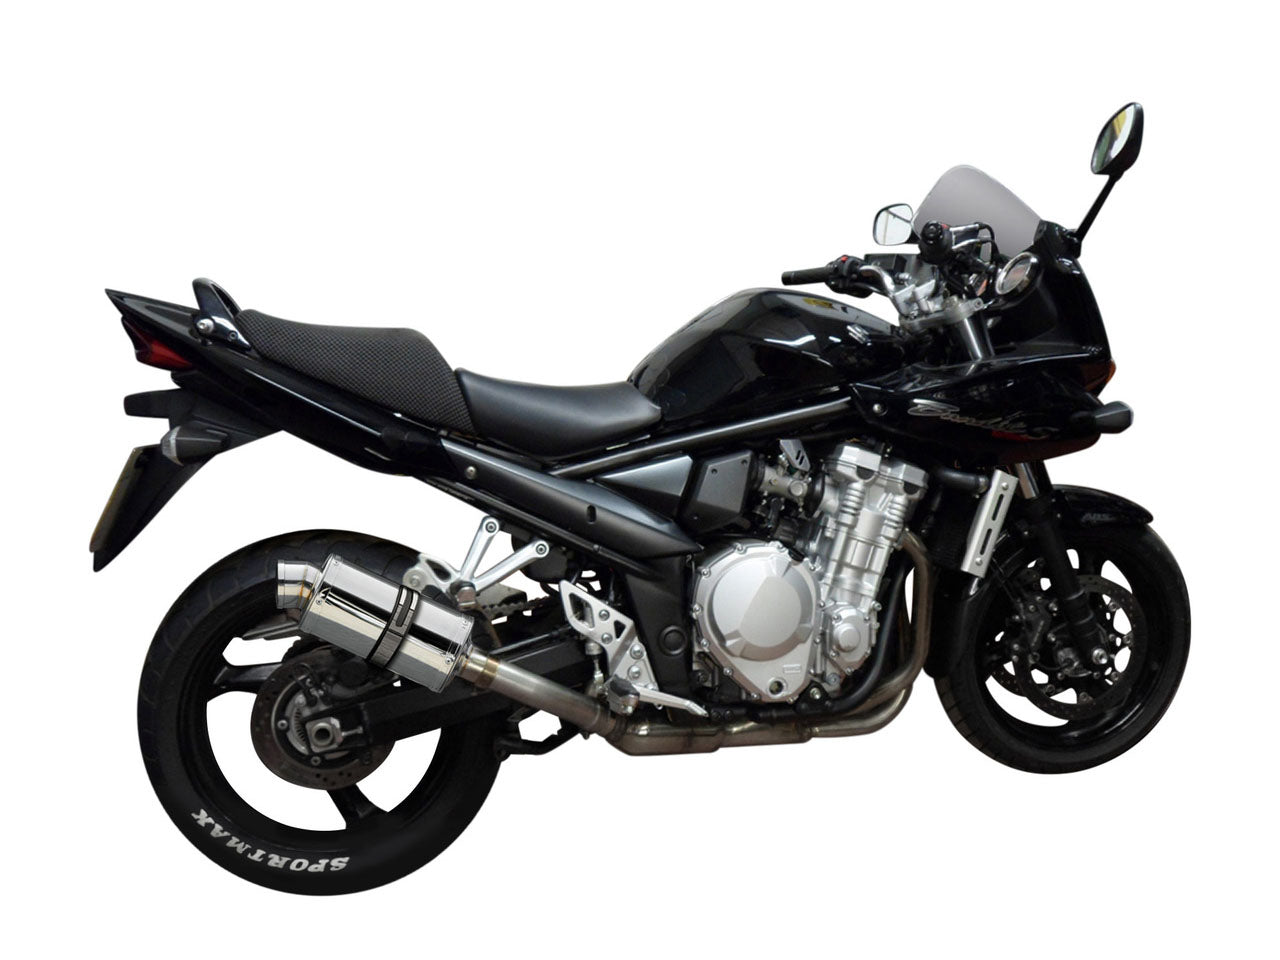 DELKEVIC Suzuki GSF1250 Bandit Full Exhaust System with SS70 9" Silencer